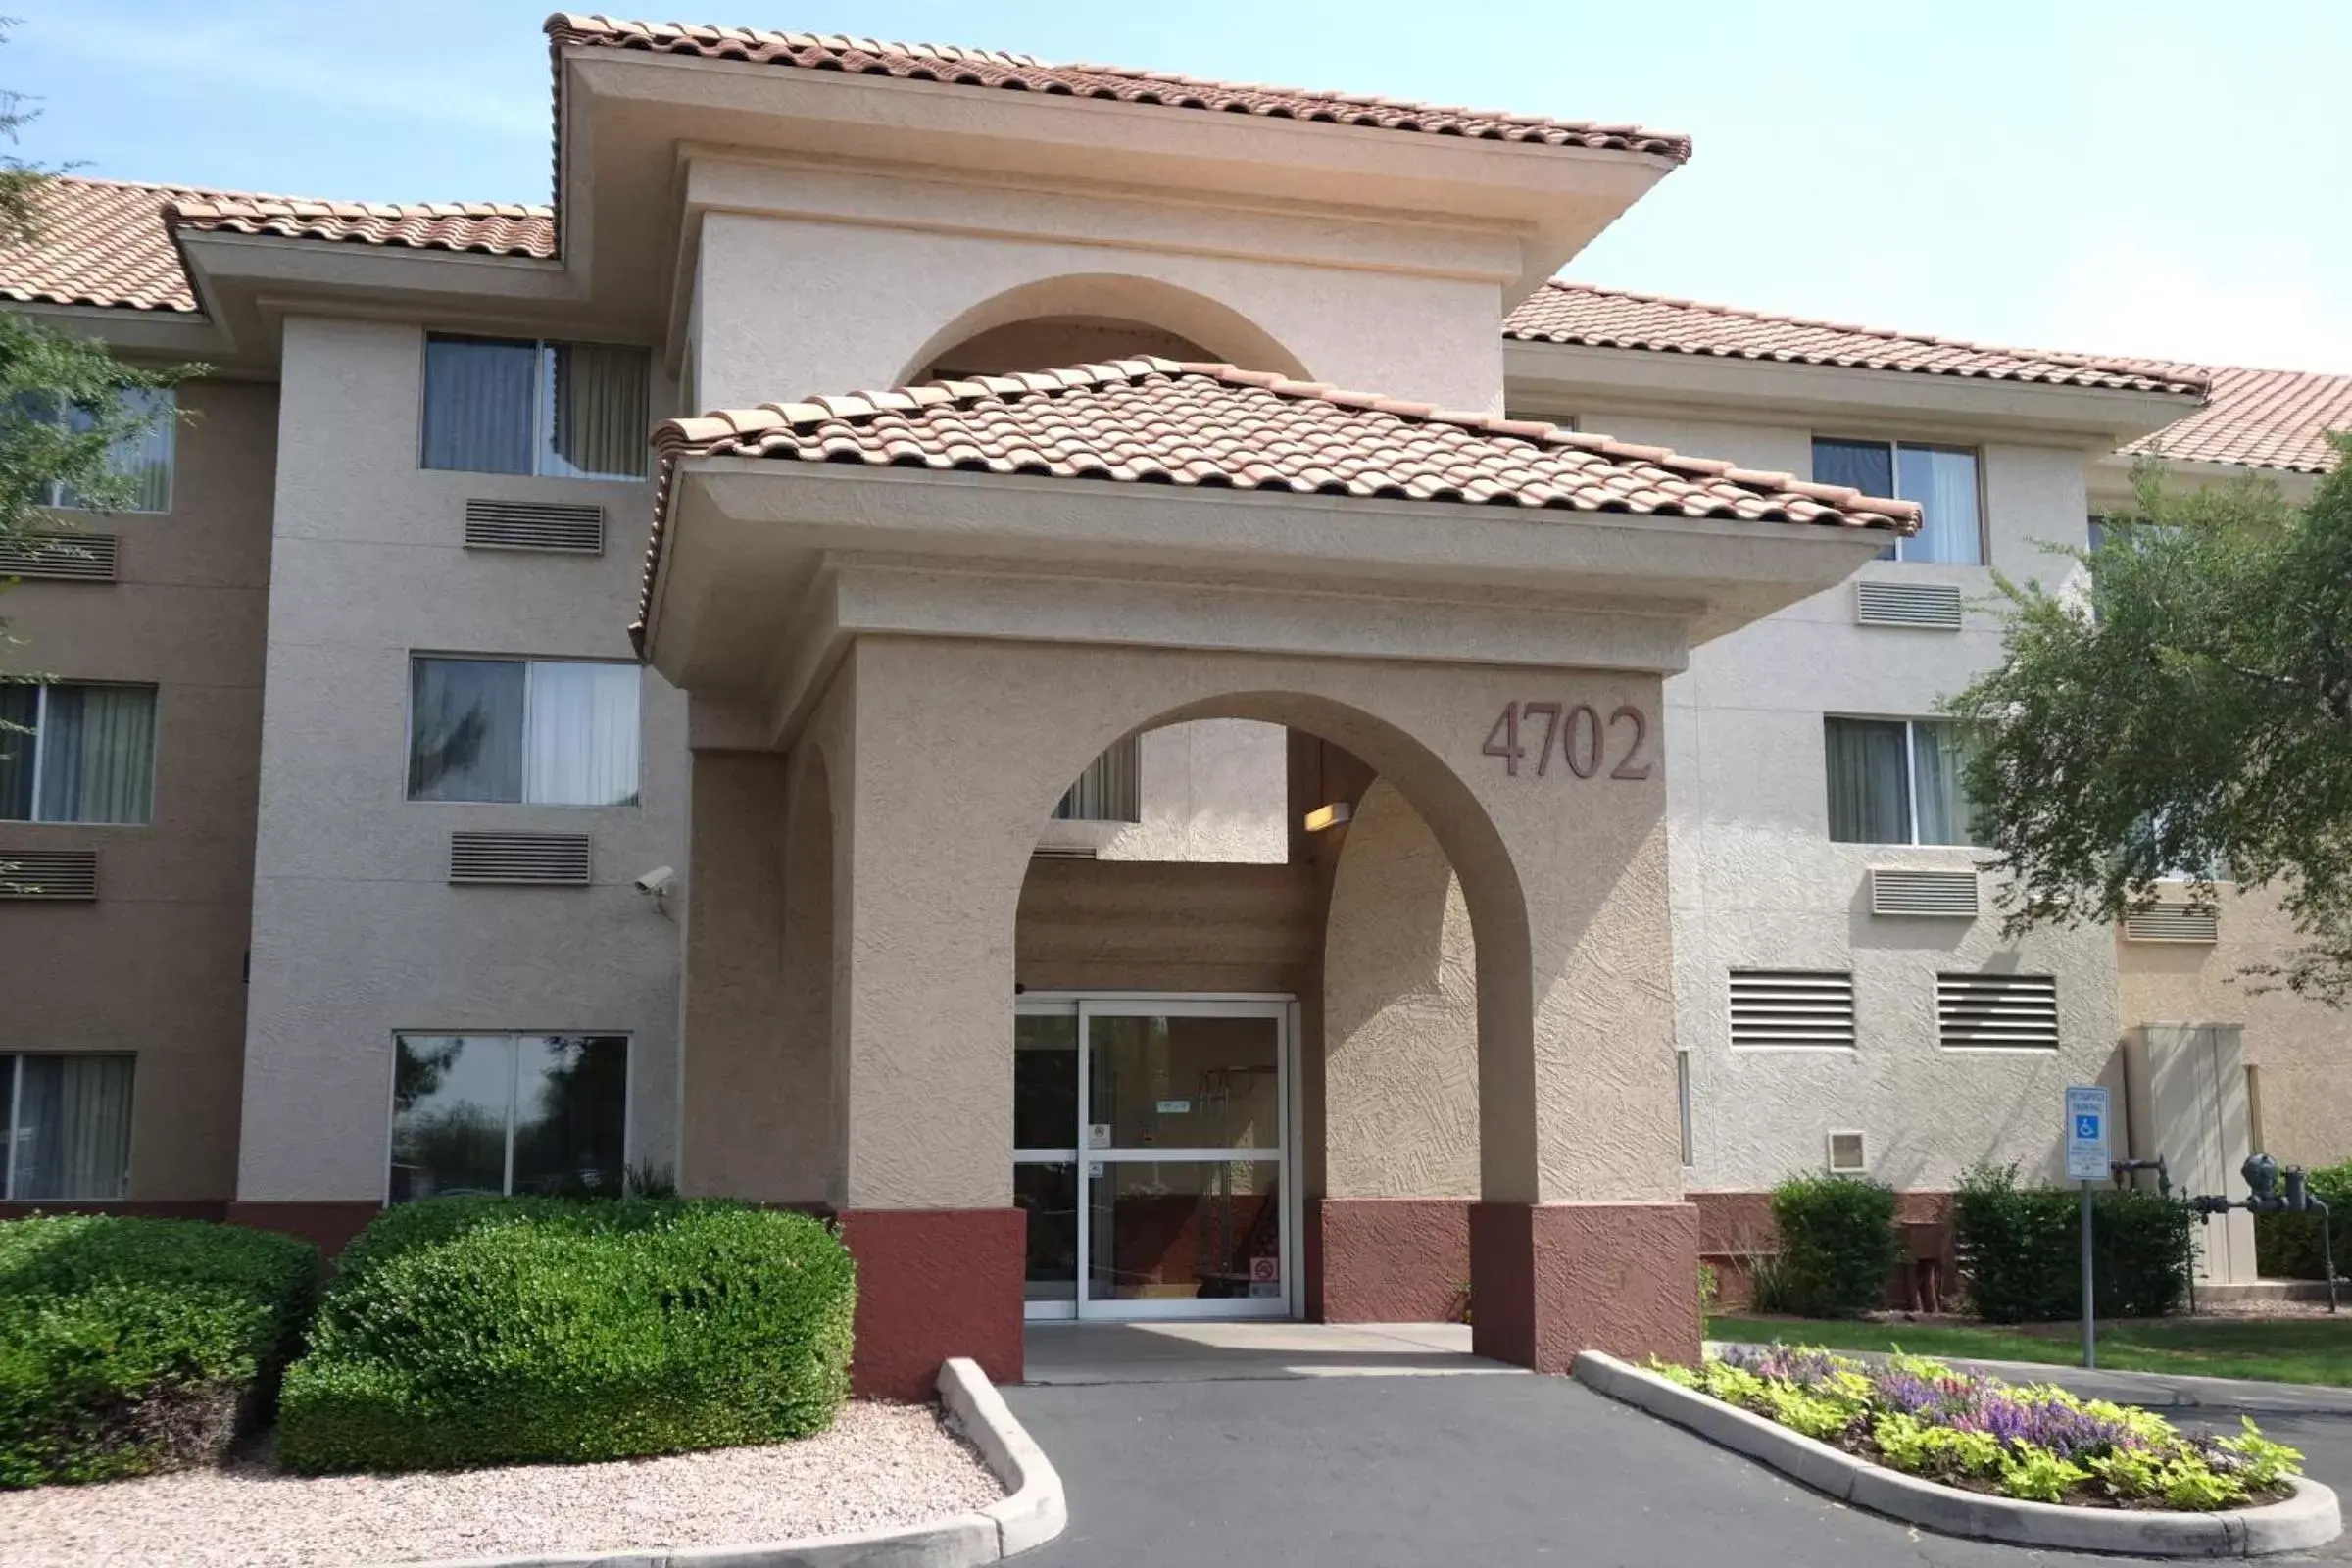 Facade/Entrance in Country Inn & Suites by Radisson, Phoenix Airport, AZ